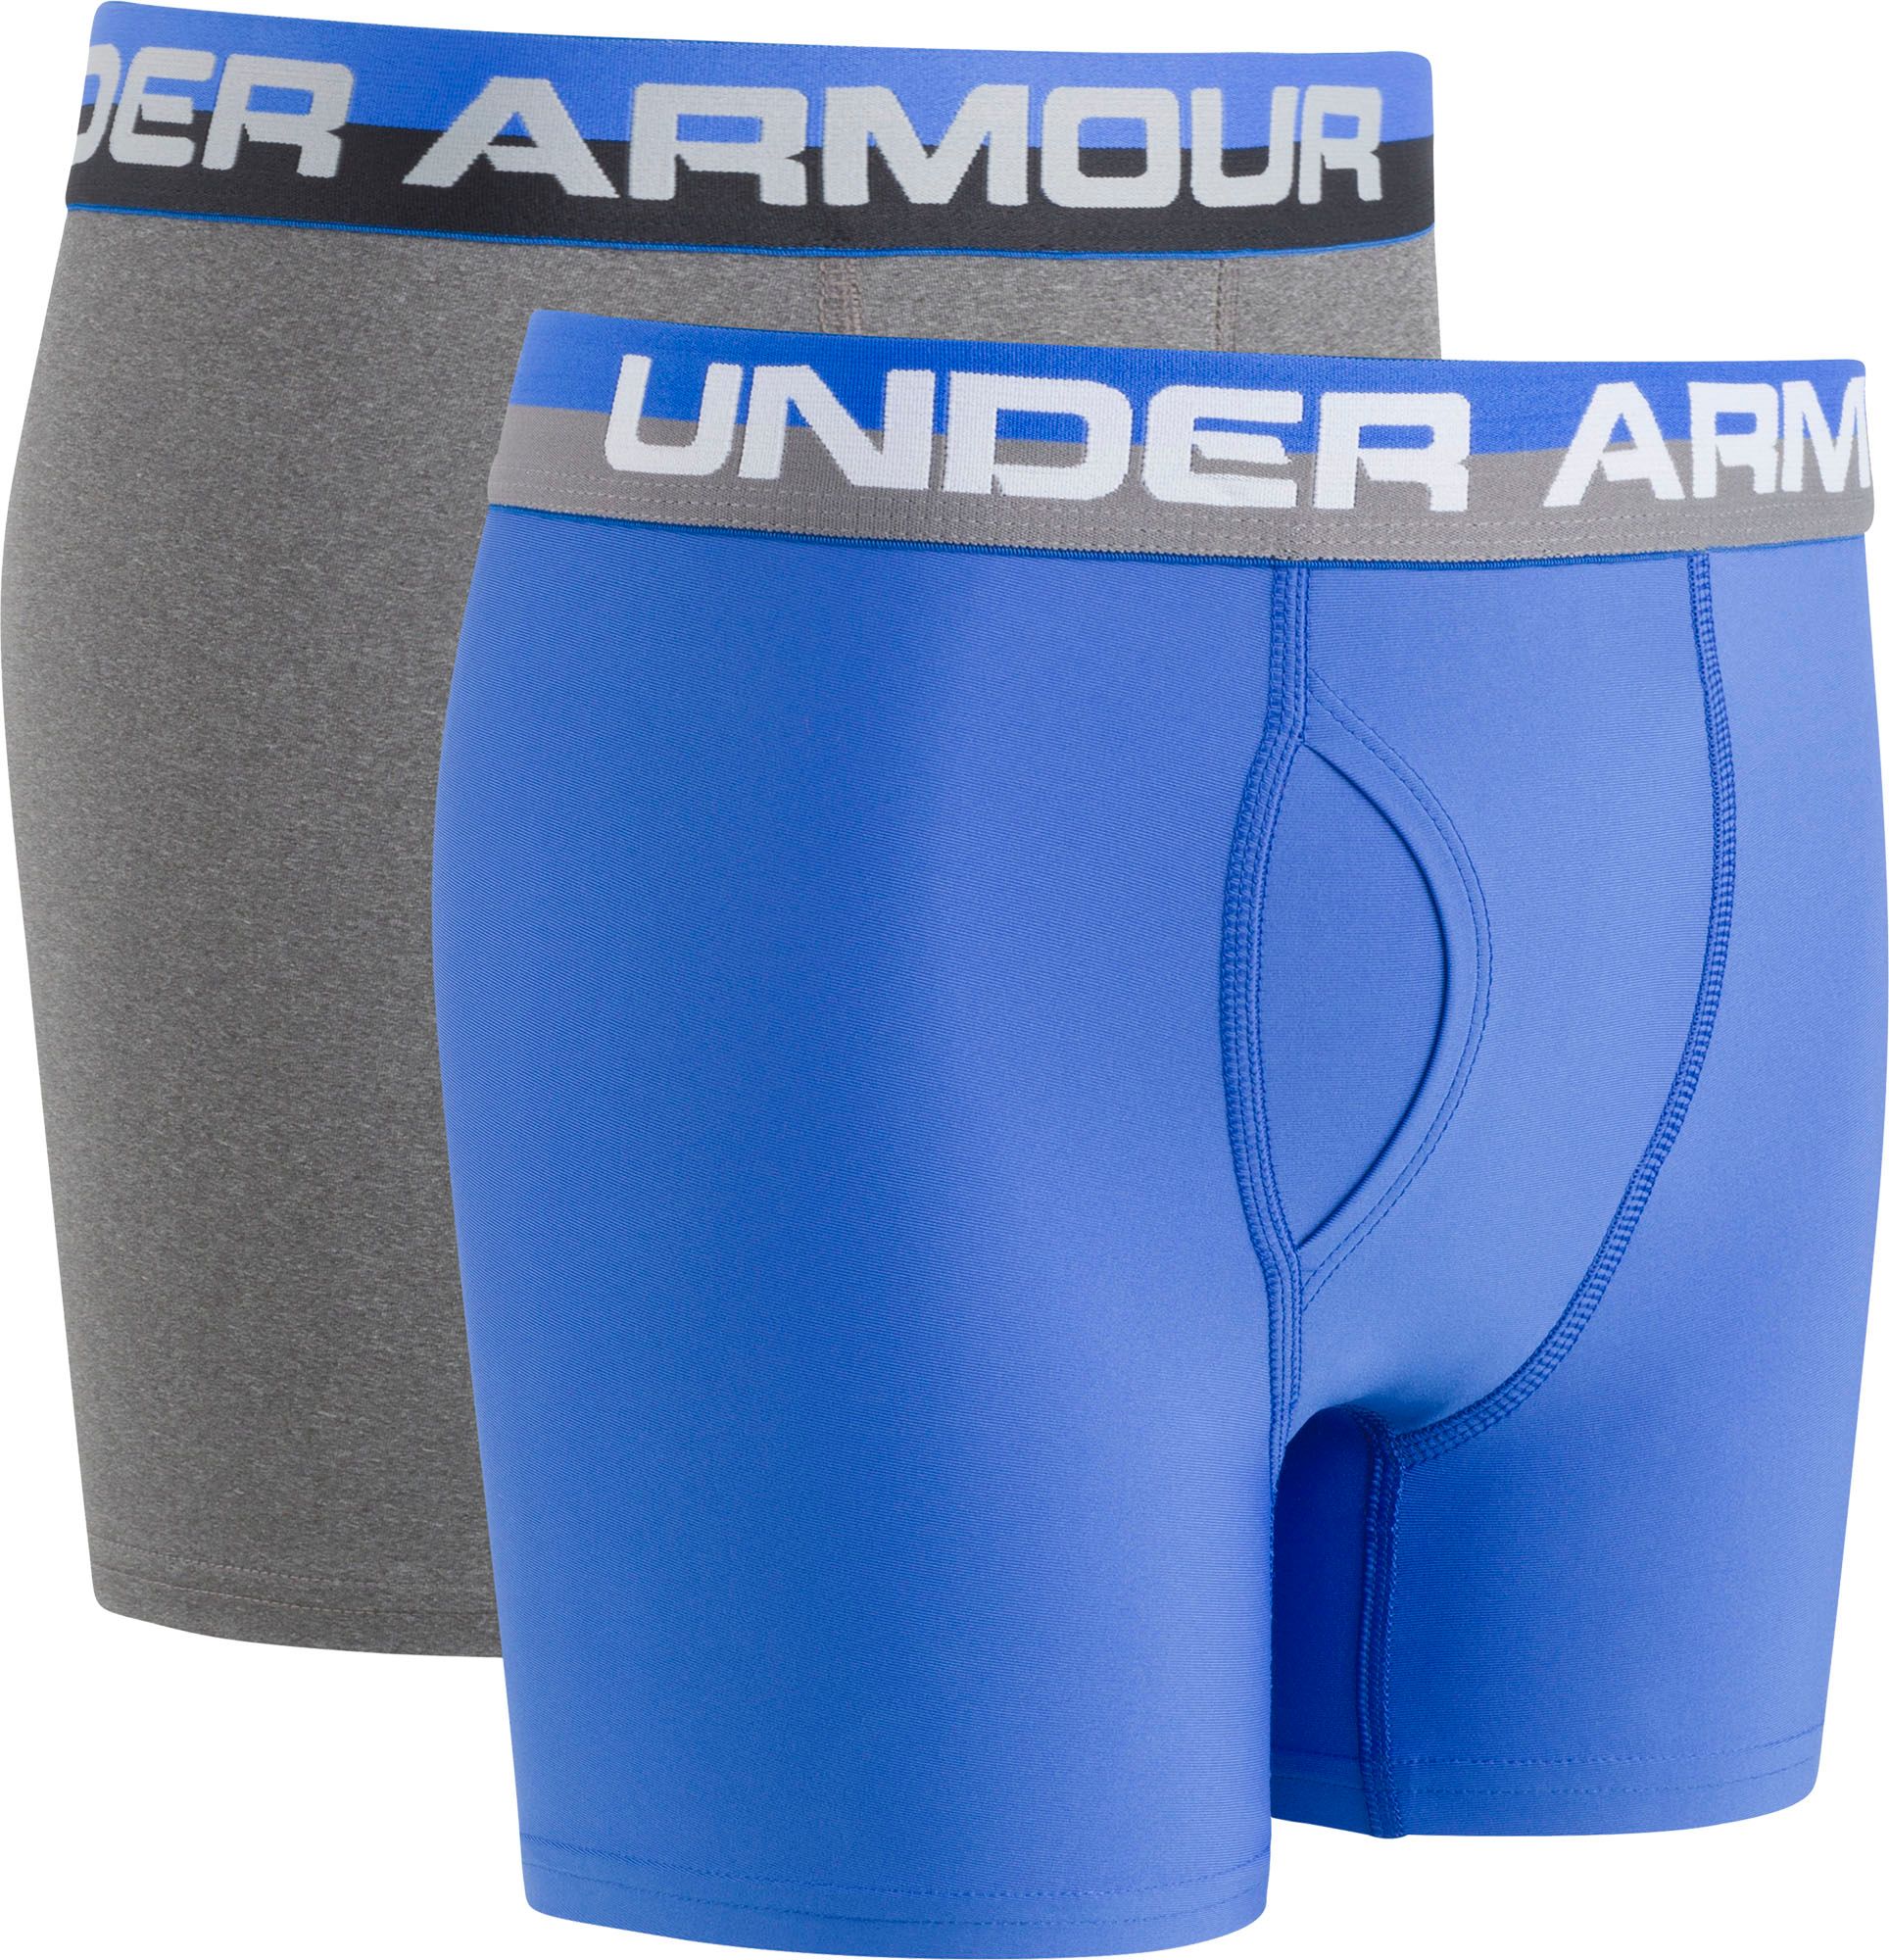 Solid Performance Boxer Briefs 